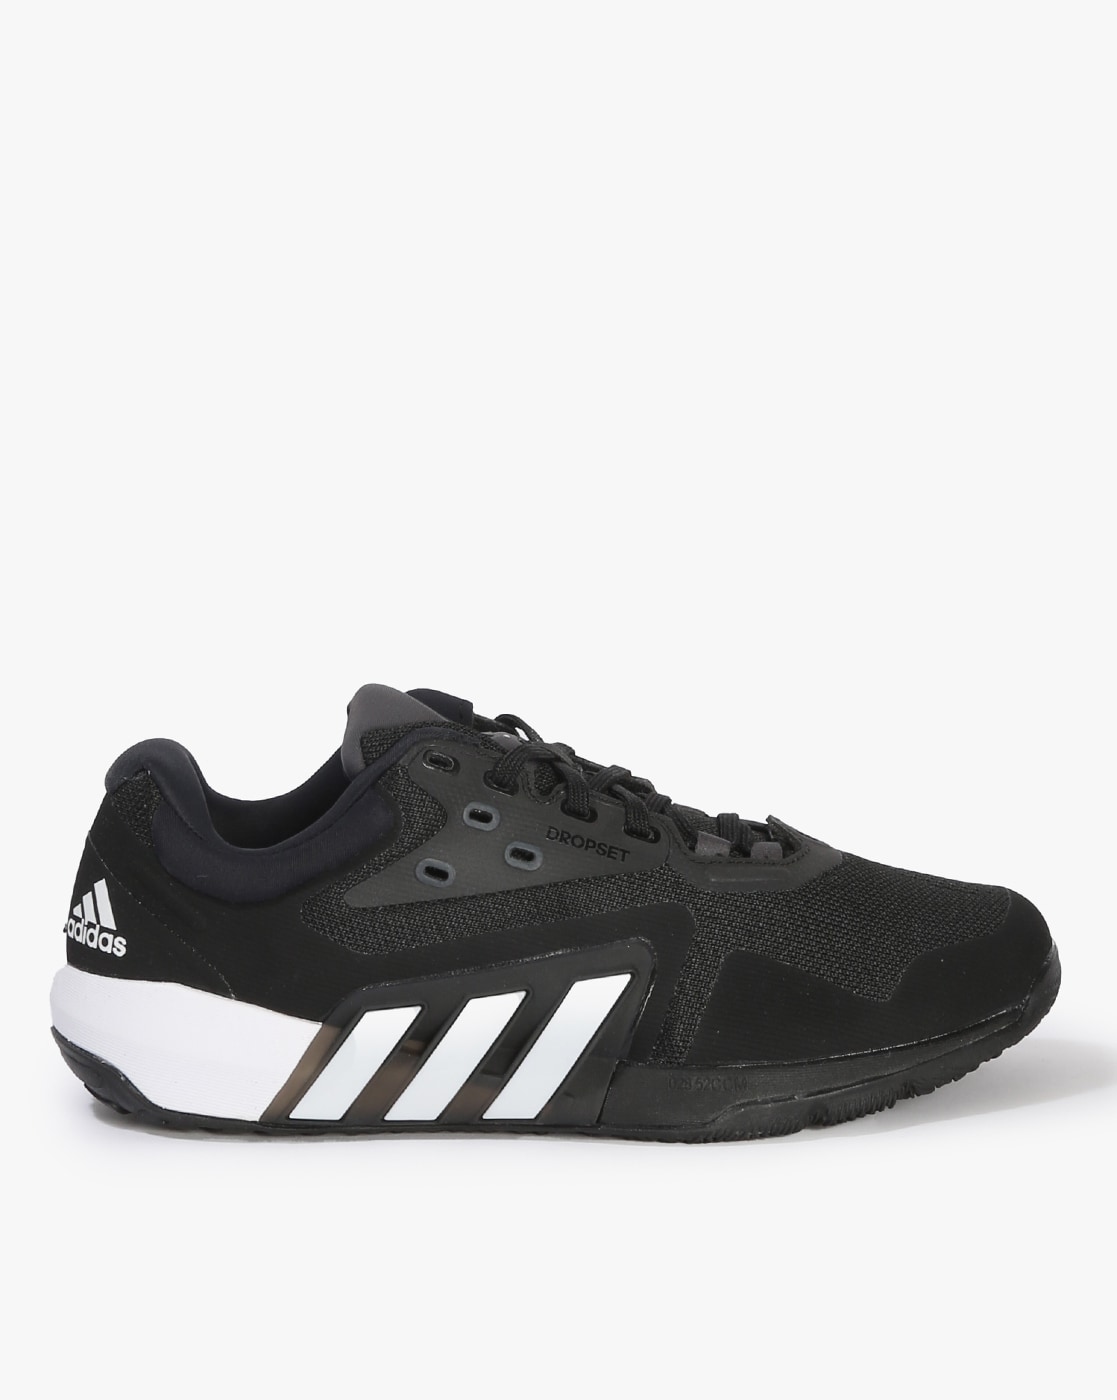 Products with Free Delivery Get the Best Deals Featured products adidas ...